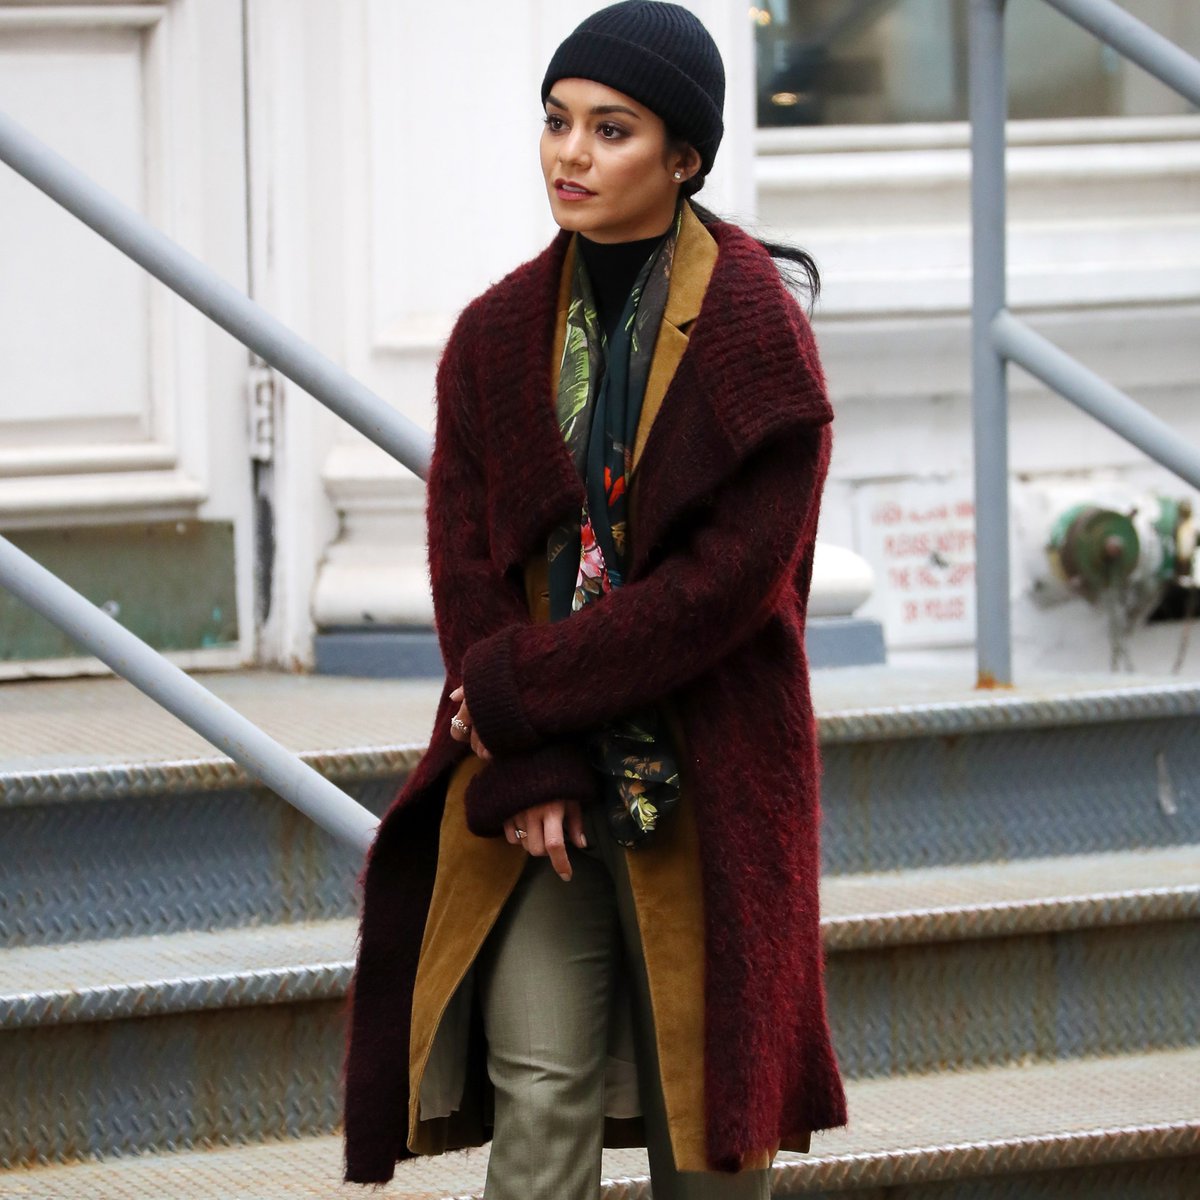 May 6, 2018: Vanessa Hudgens on the set of 'Second Act' in New York.